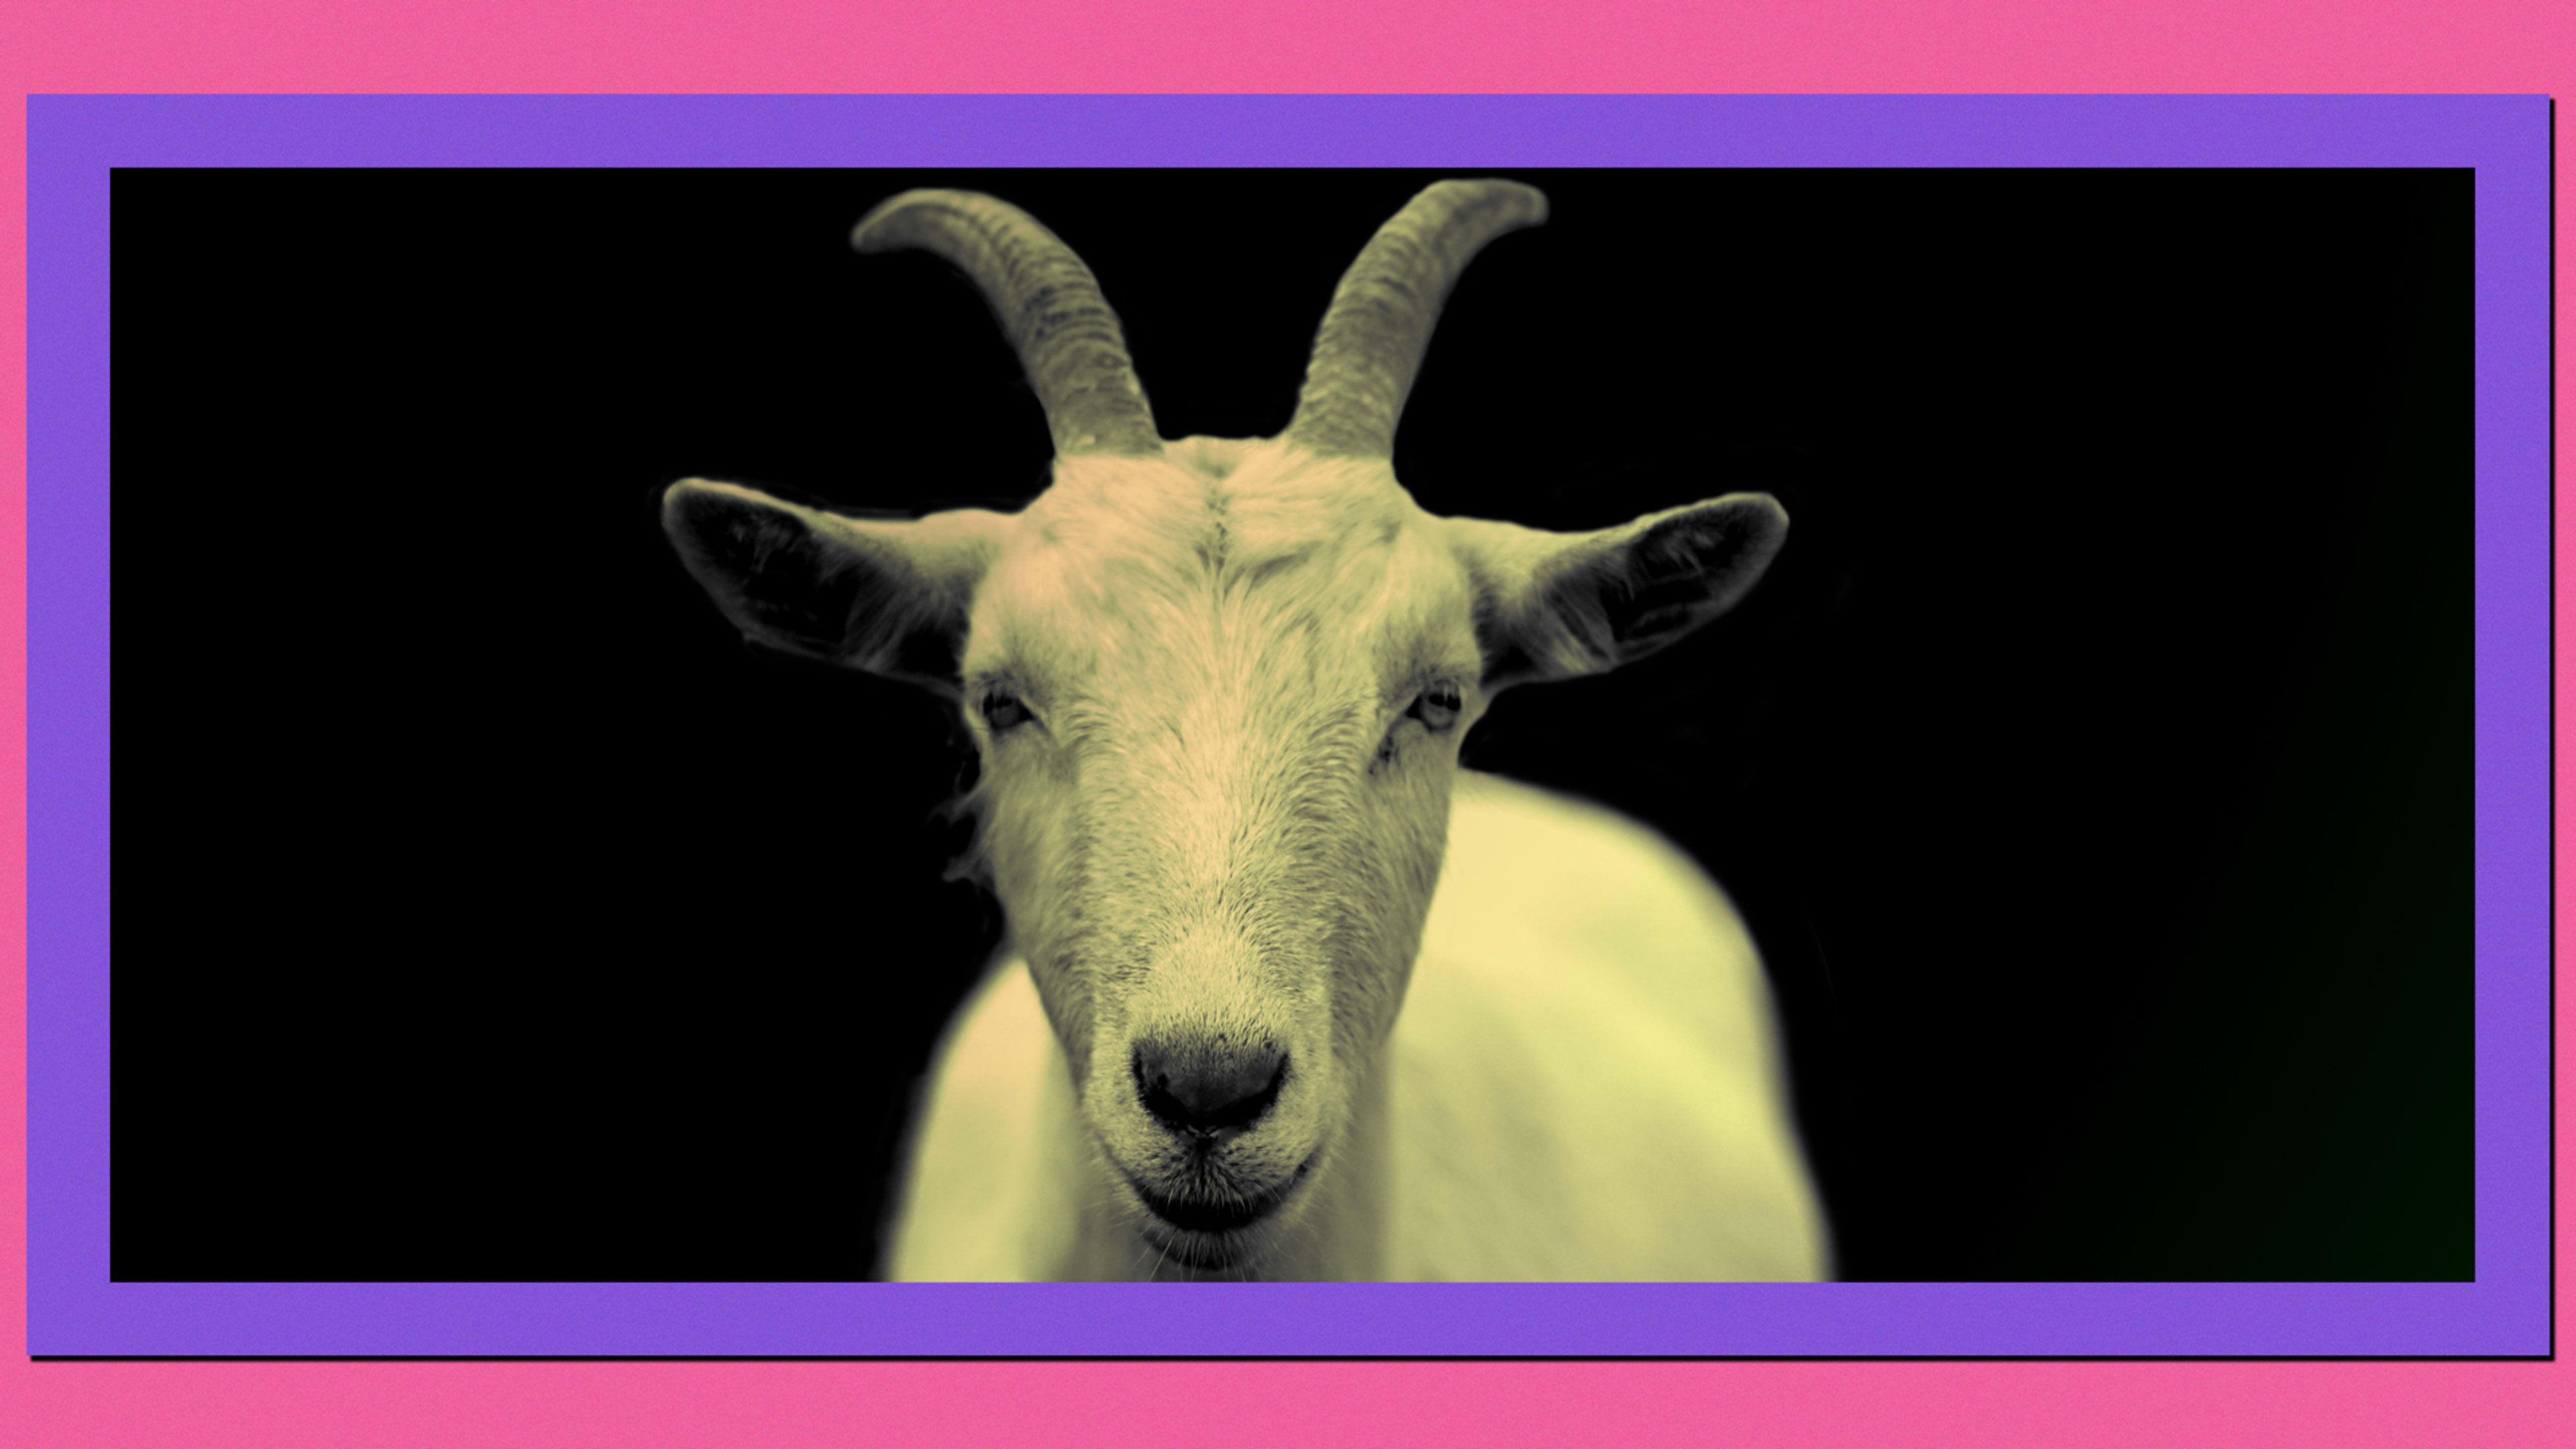 You can now book a goat to liven up your boring Zoom meeting (yes,seriously)